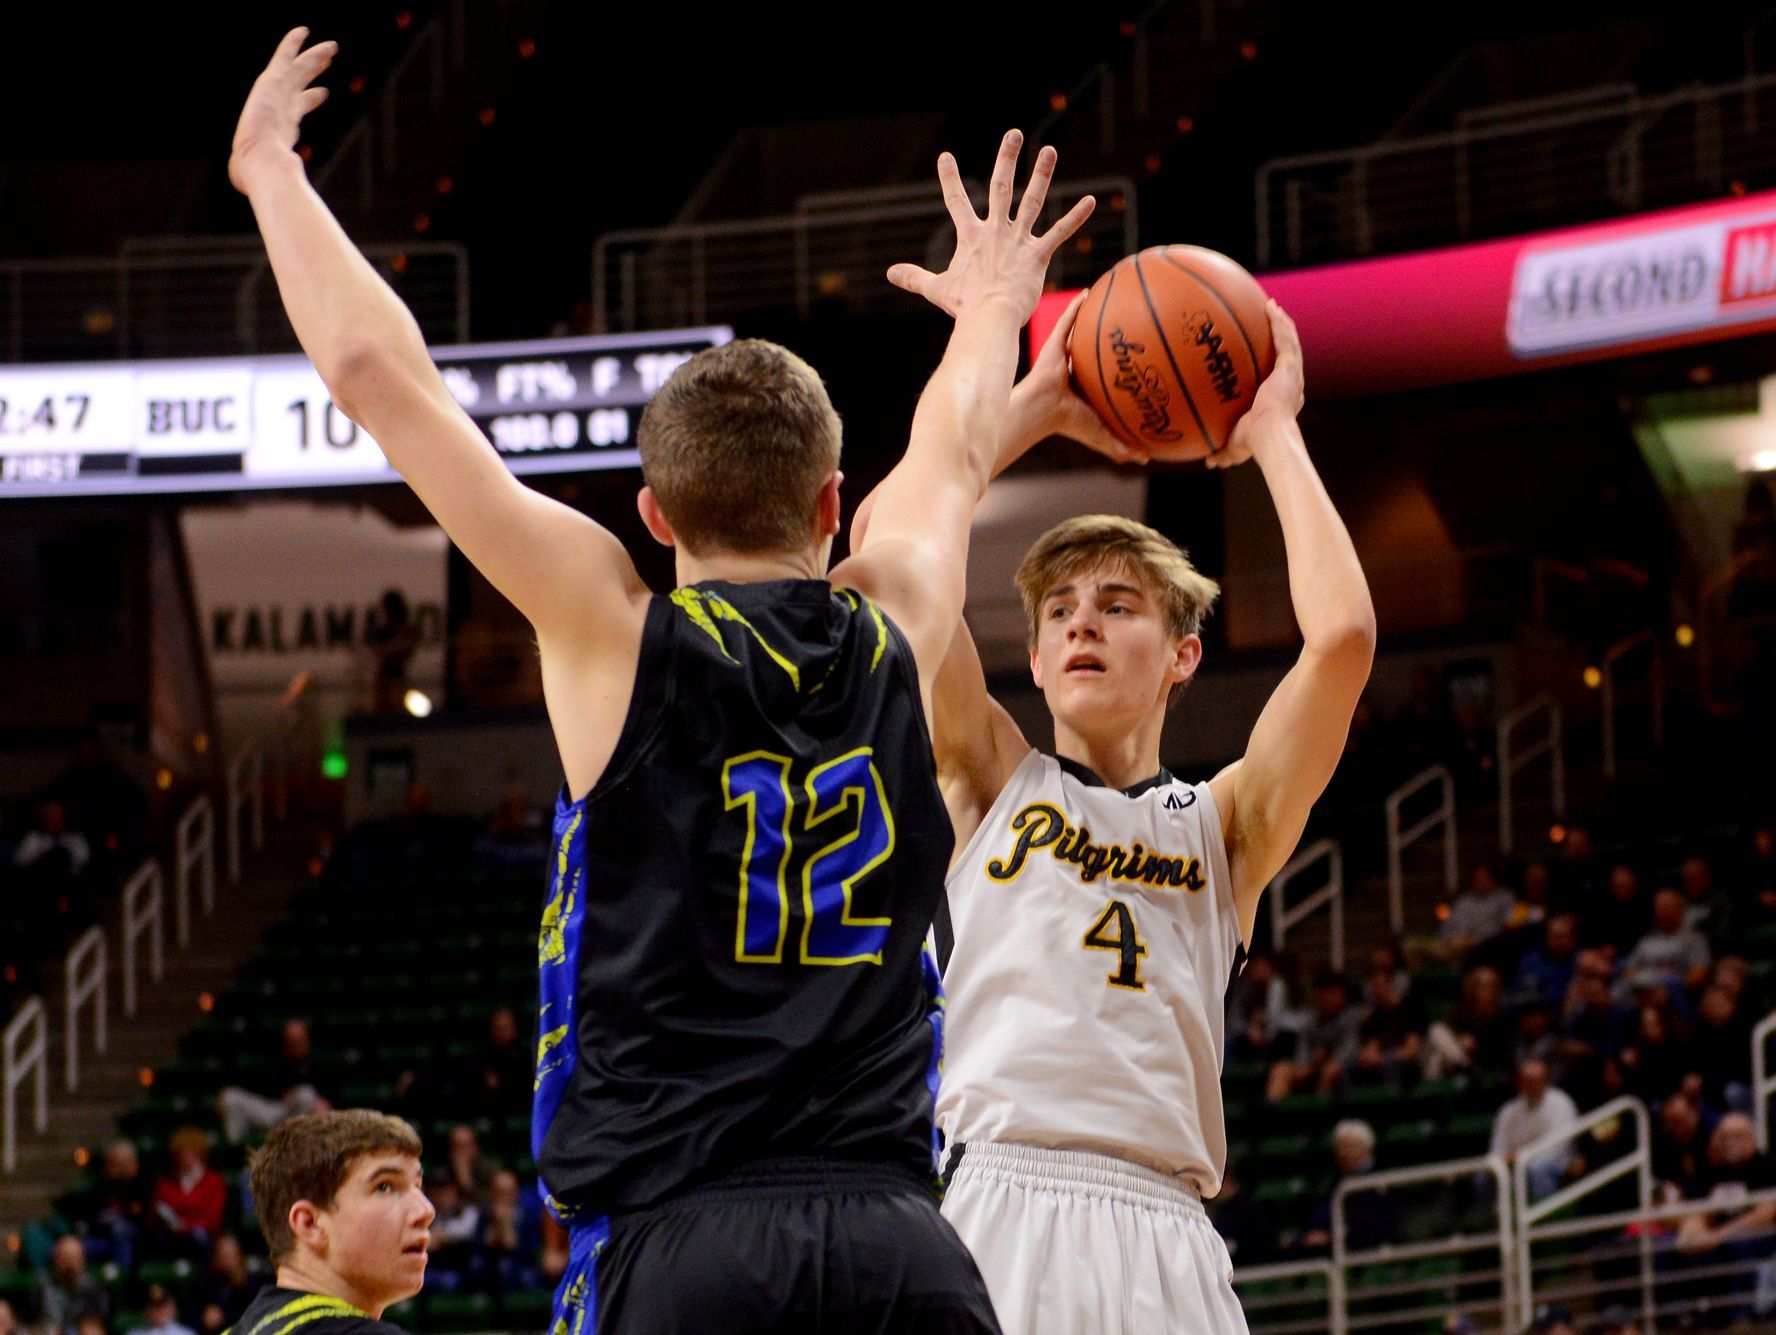 Lansing Christian's Kyle Lebeda looks to pass as Buckley's Austin Harris tries to block during the MHSAA state semifinal against Buckley on Thursday, March 23, 2017 at the Breslin Center in East Lansing.